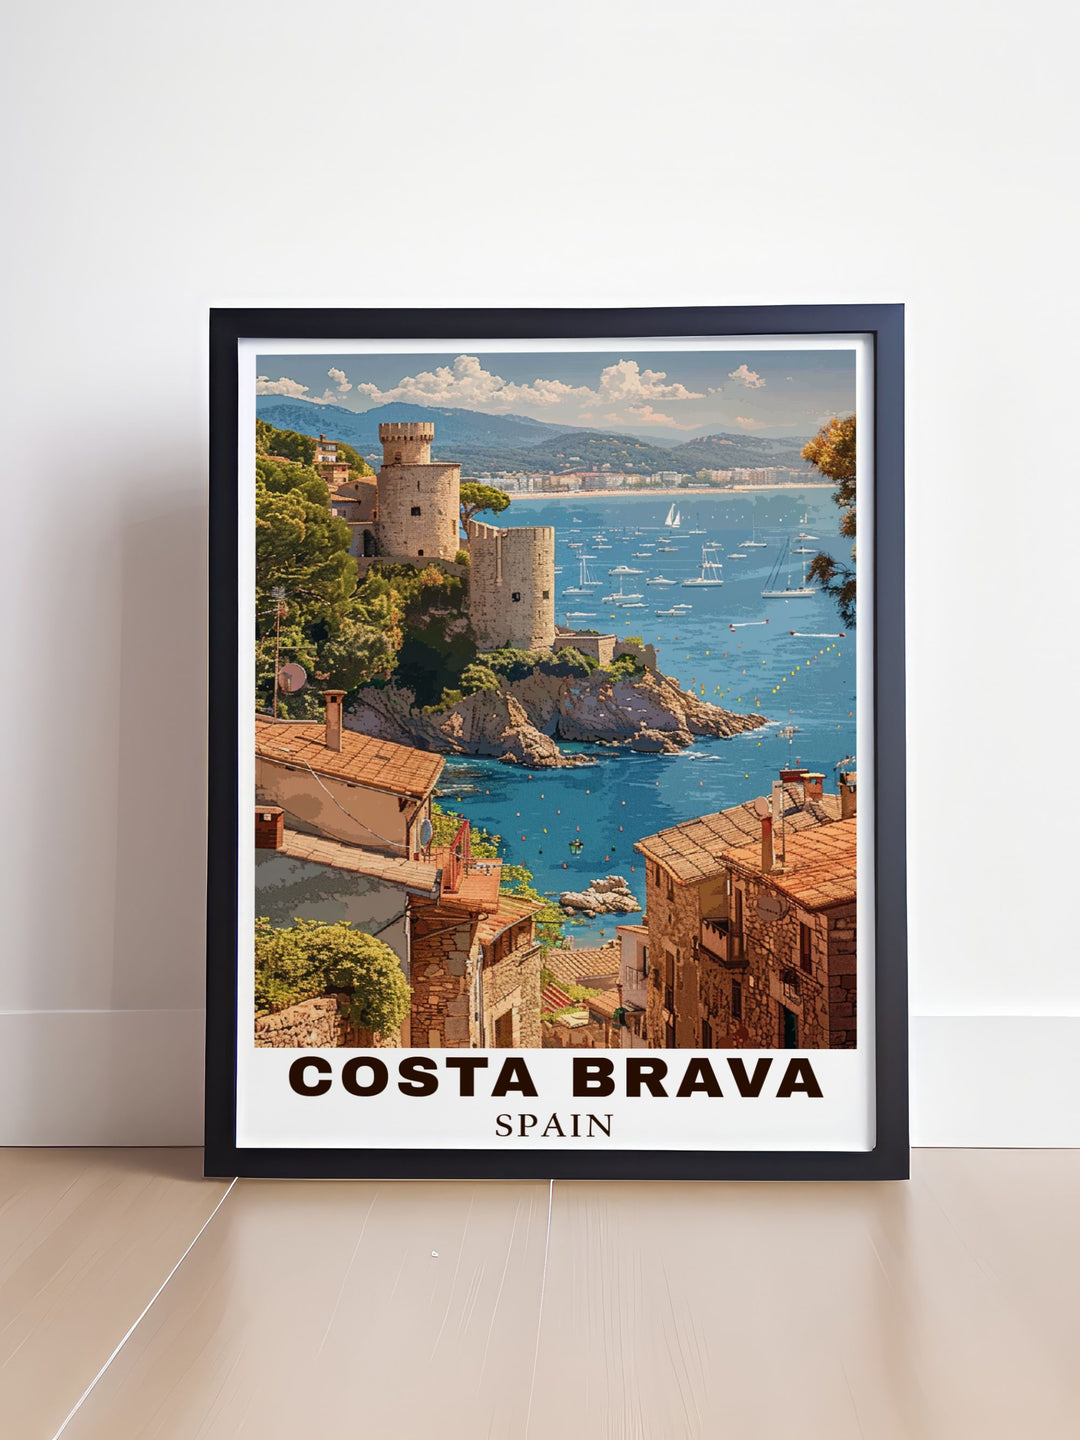 Bring the essence of the Mediterranean into your home with this beautiful travel poster of Costa Brava, showcasing its serene landscapes.